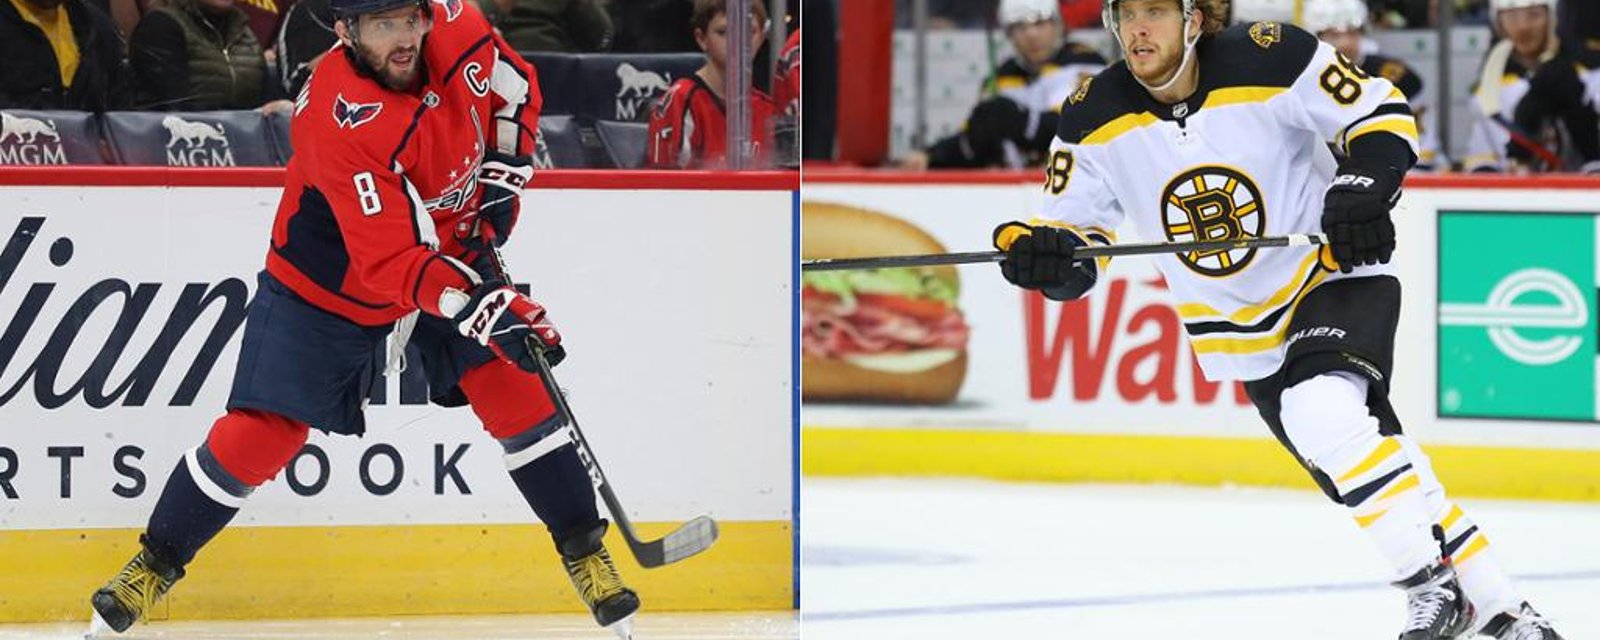 David Pastrnak deletes picture with Ovechkin after backlash